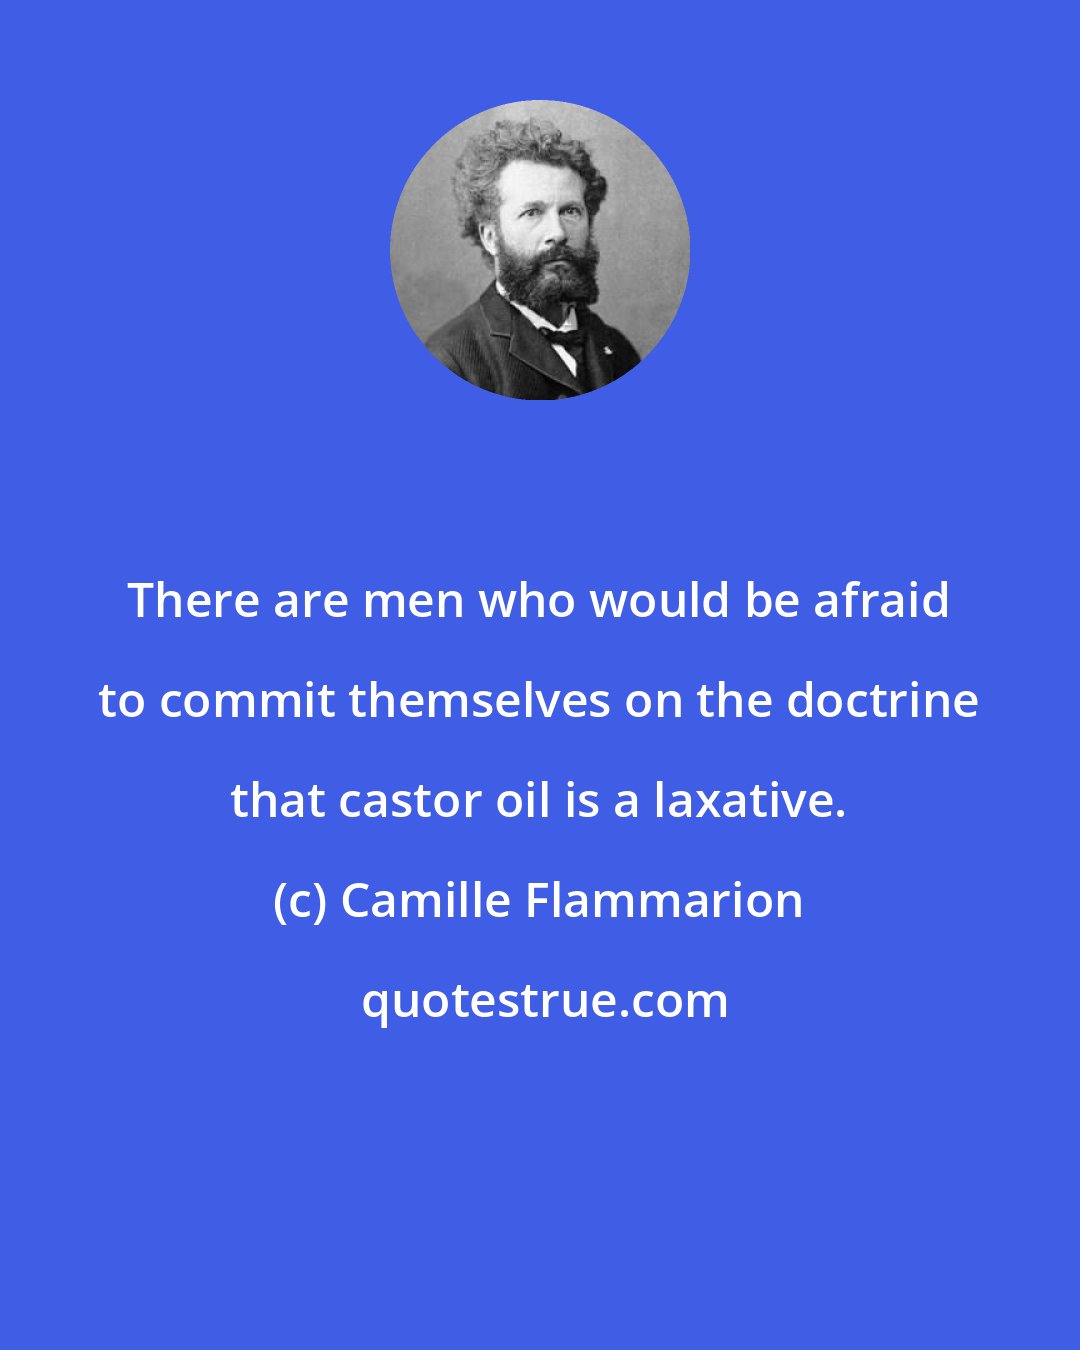 Camille Flammarion: There are men who would be afraid to commit themselves on the doctrine that castor oil is a laxative.